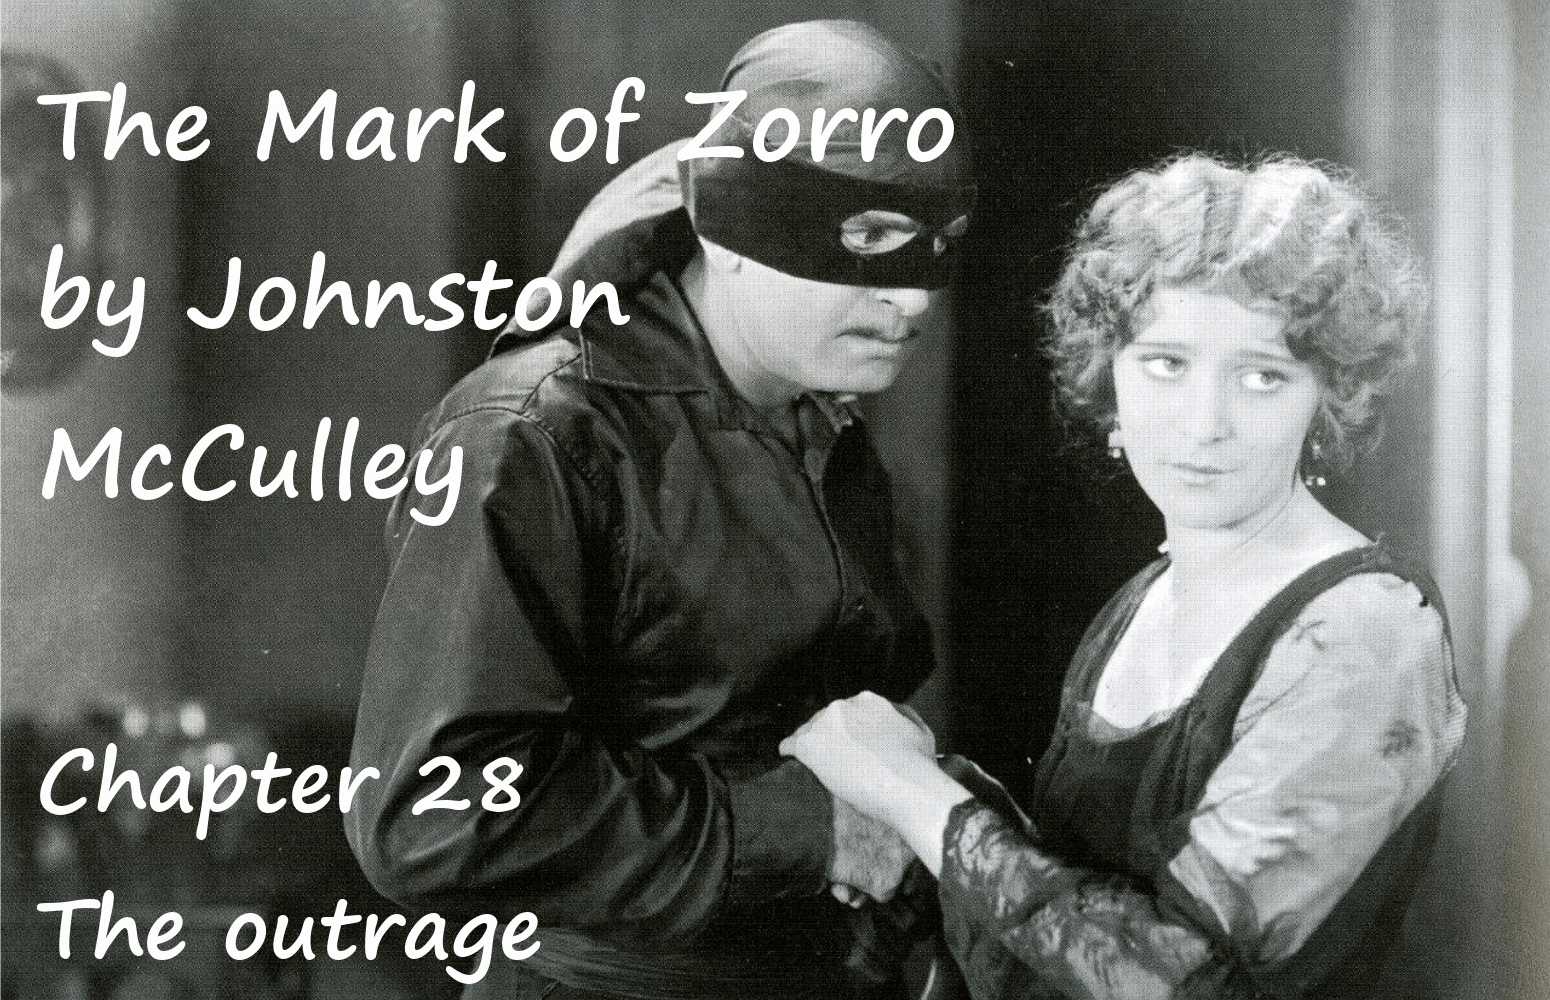 The Mark of Zorro chapter 28 The outrage by Johnston McCulley